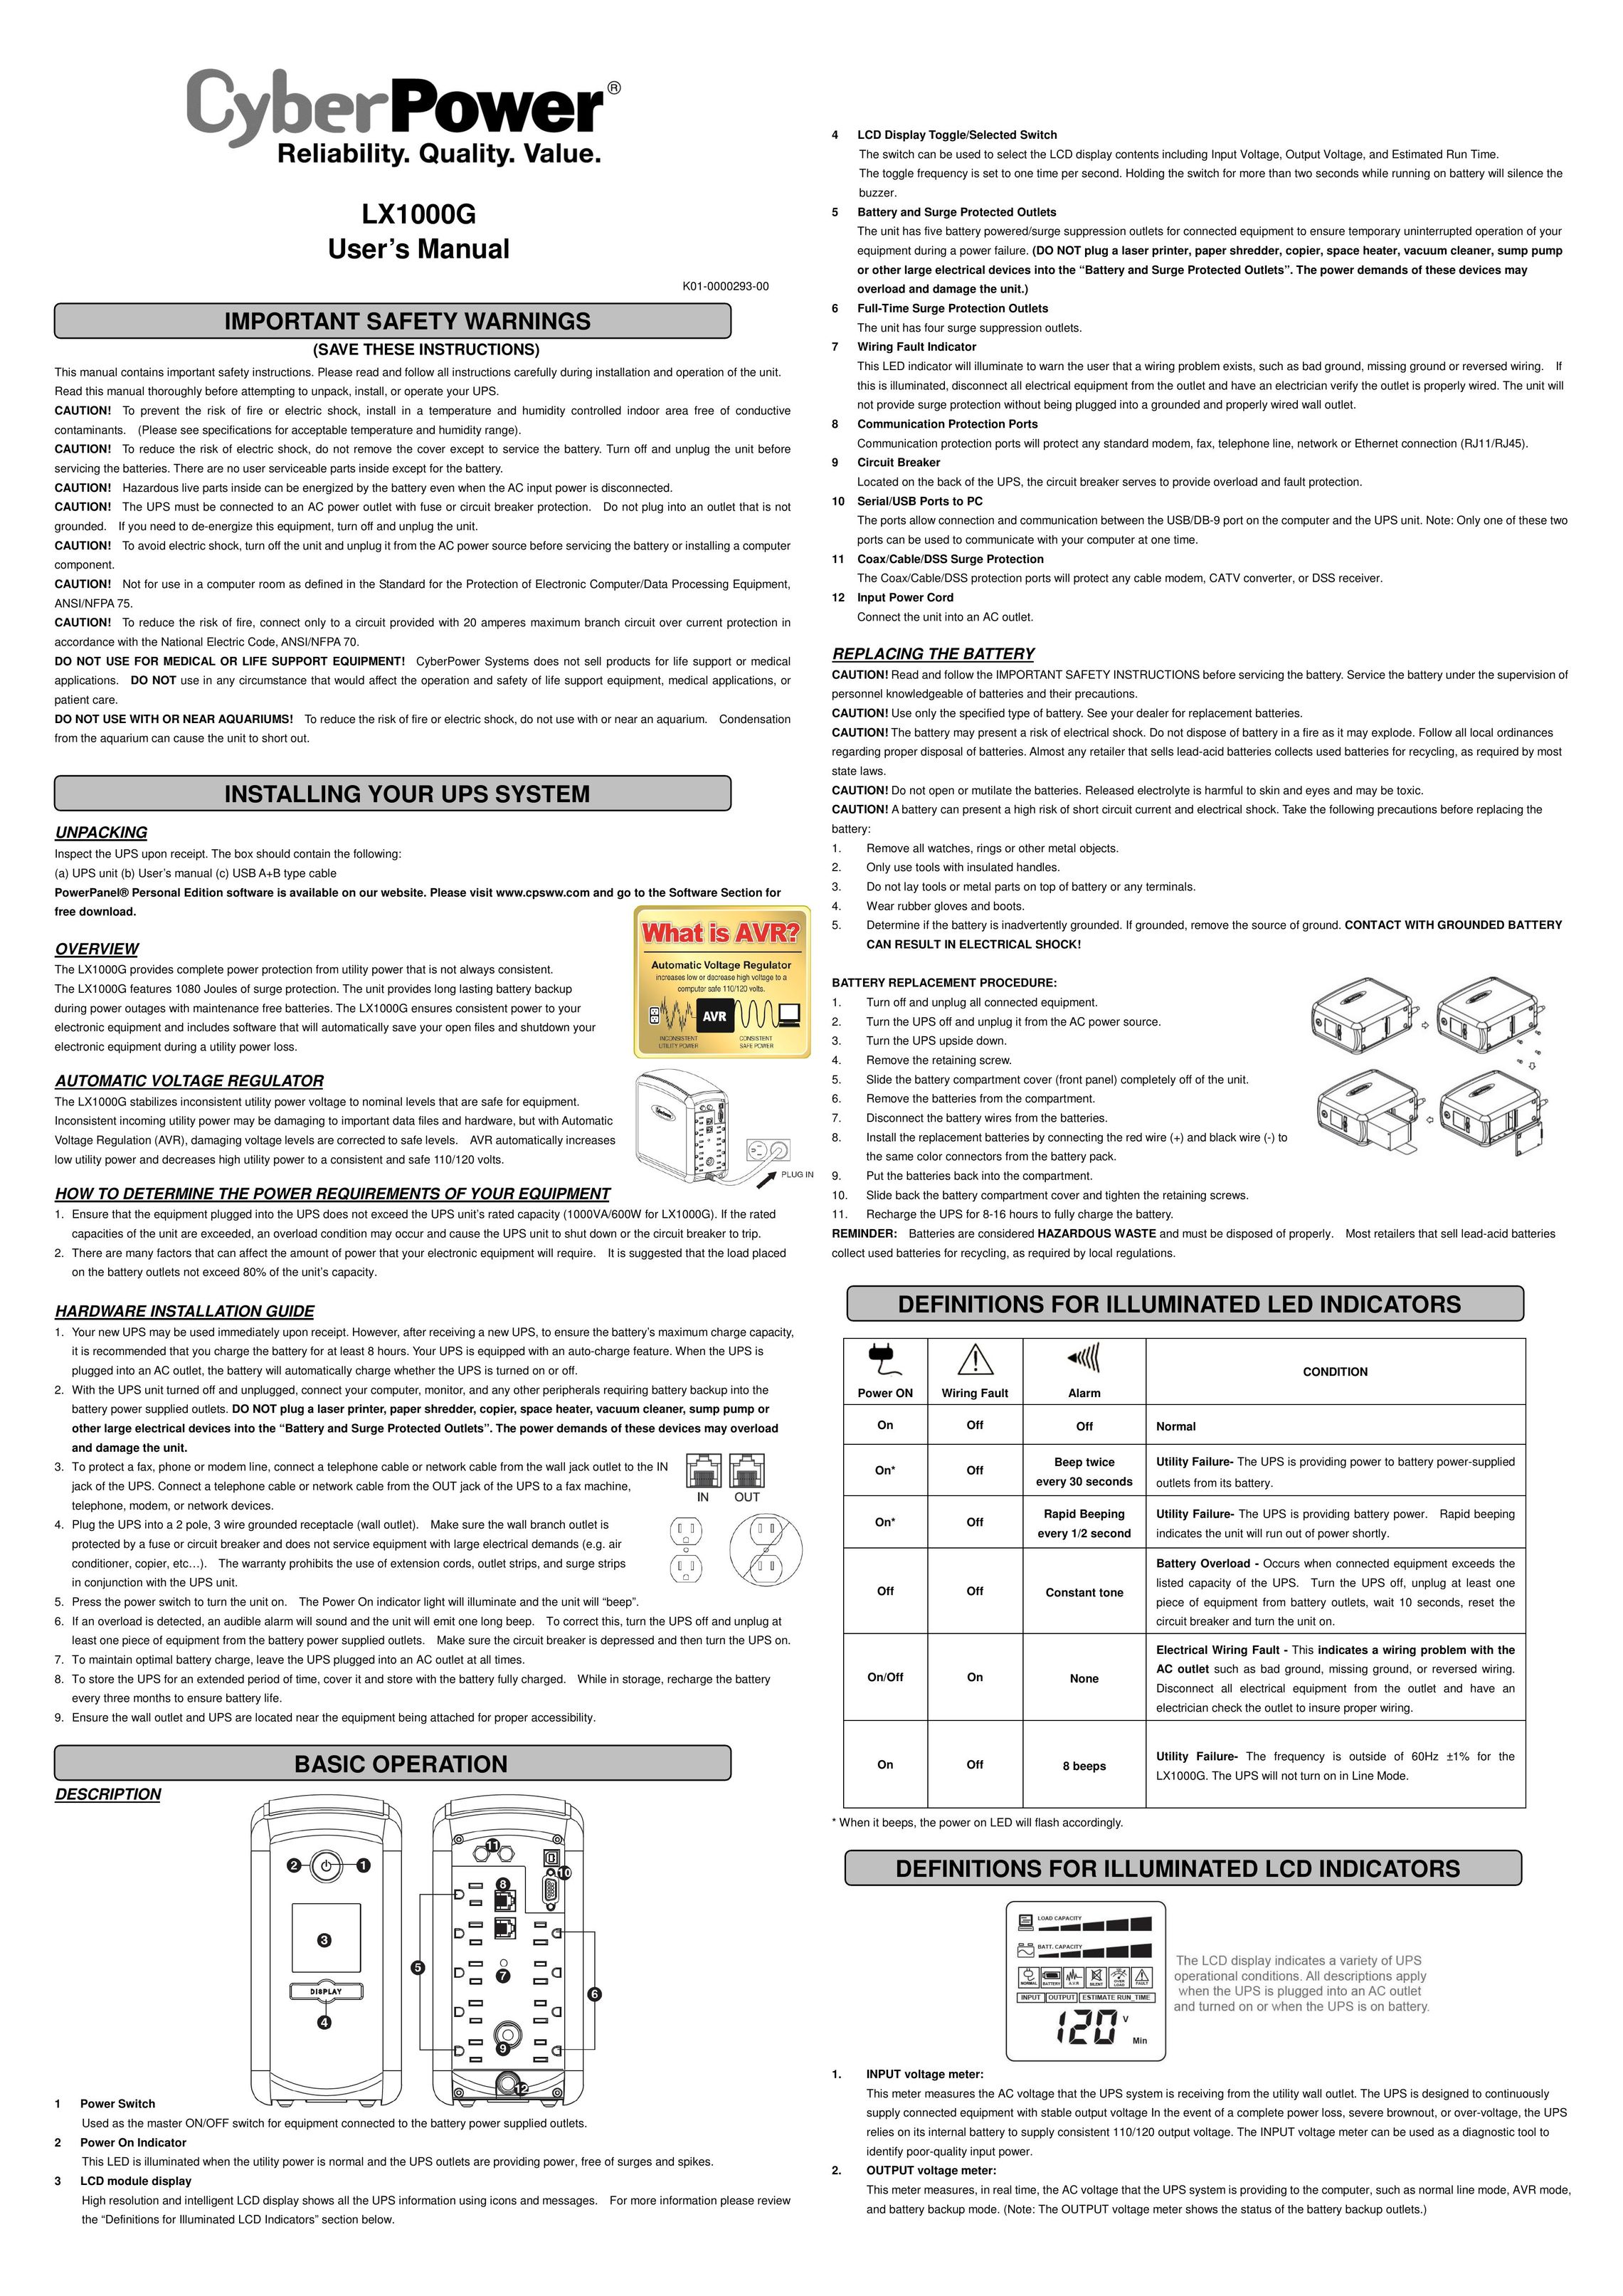 CyberPower LX1000G Power Supply User Manual